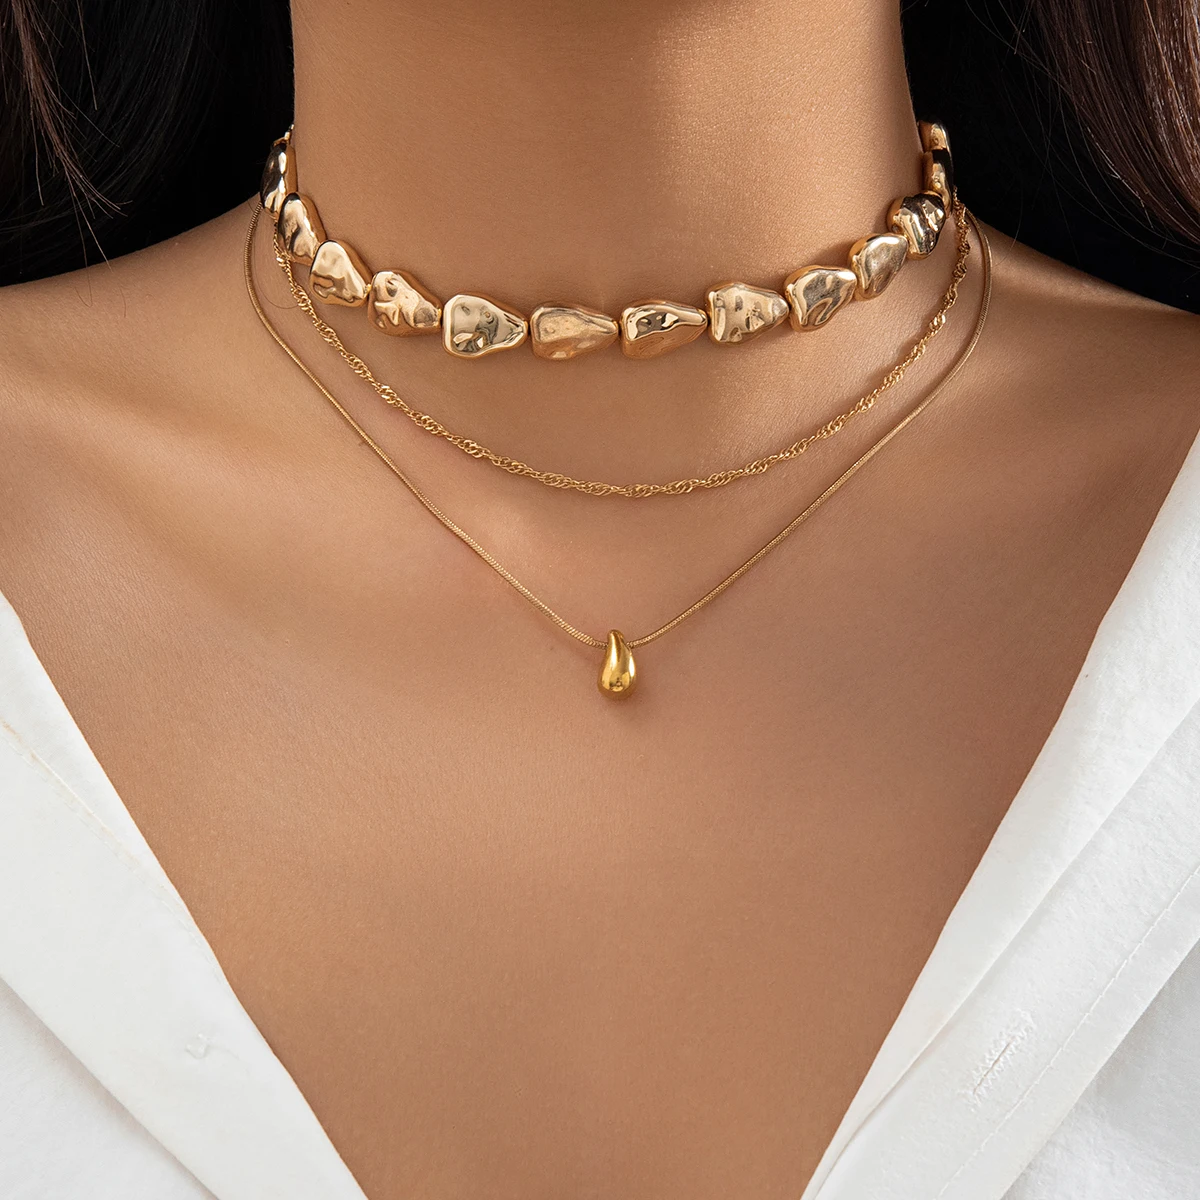 

Lacteo Fashion CCB Small Comma Drop Shape Charm Necklace for Women Multilayer Snake Chain Chokers Party Girls Jewelry Collar